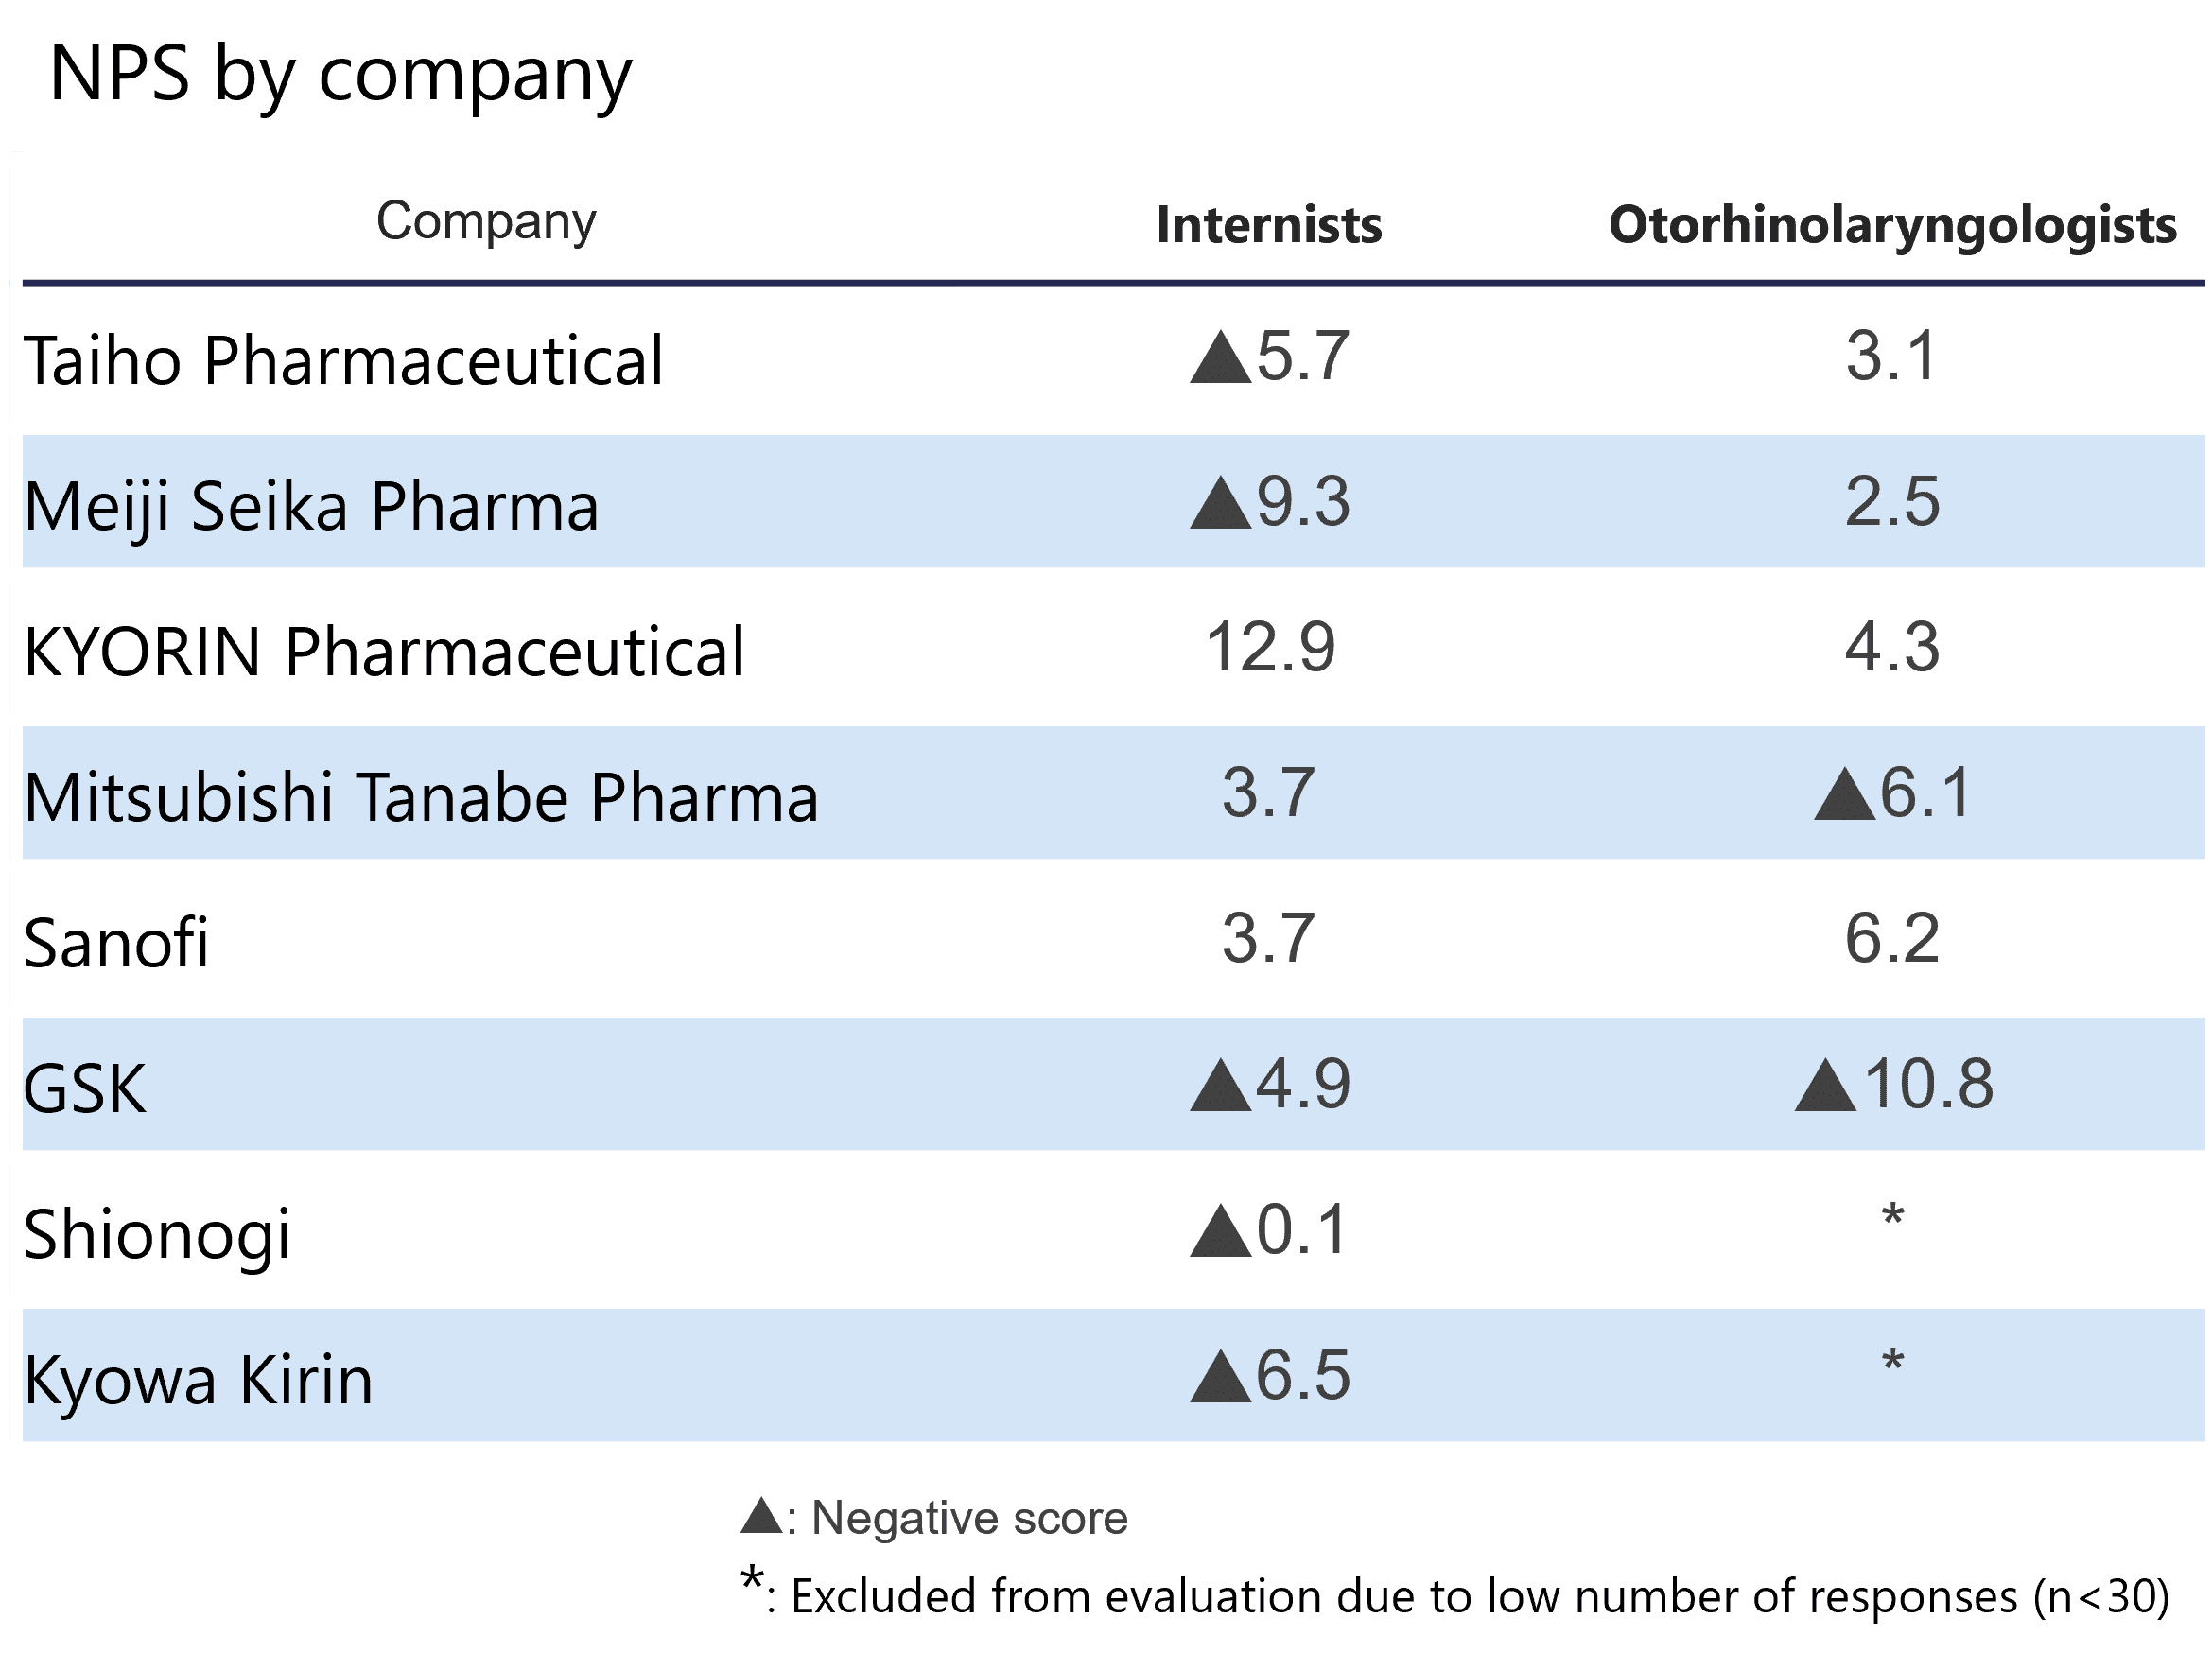 In NPS, which measures customer recommendations, Taiho Pharmaceutical, which was considered the most trustworthy company, received a negative score.